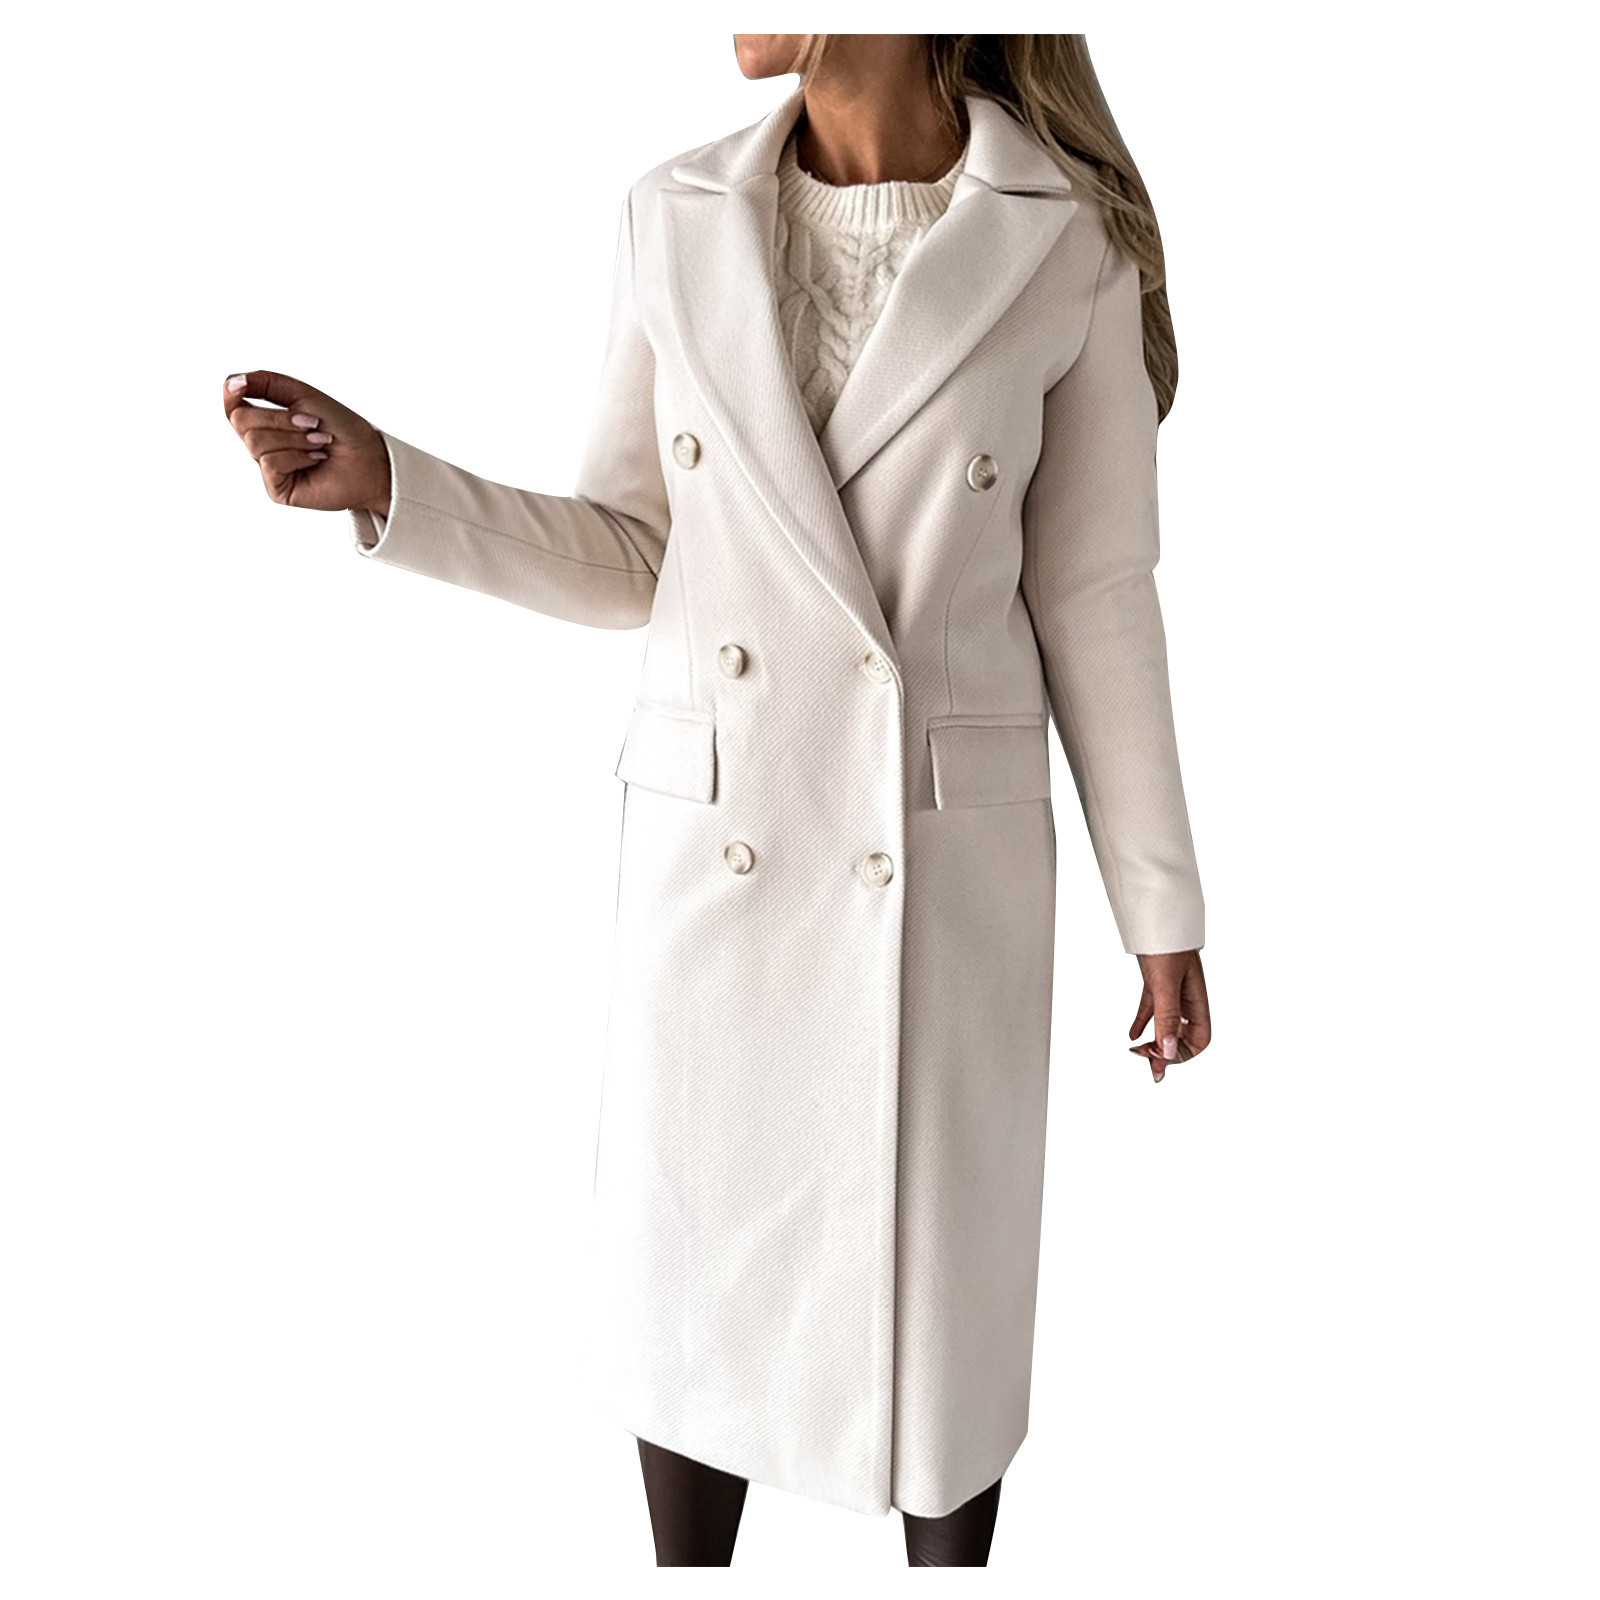 Hfyihgf Women's Double Breasted Trench Coat Classic Notch Collar Long Sleeve Peacoats Winter Warm Slim Fit Long Woolen Jackets Coat with Pockets Clearance(Beige,S) - image 1 of 5